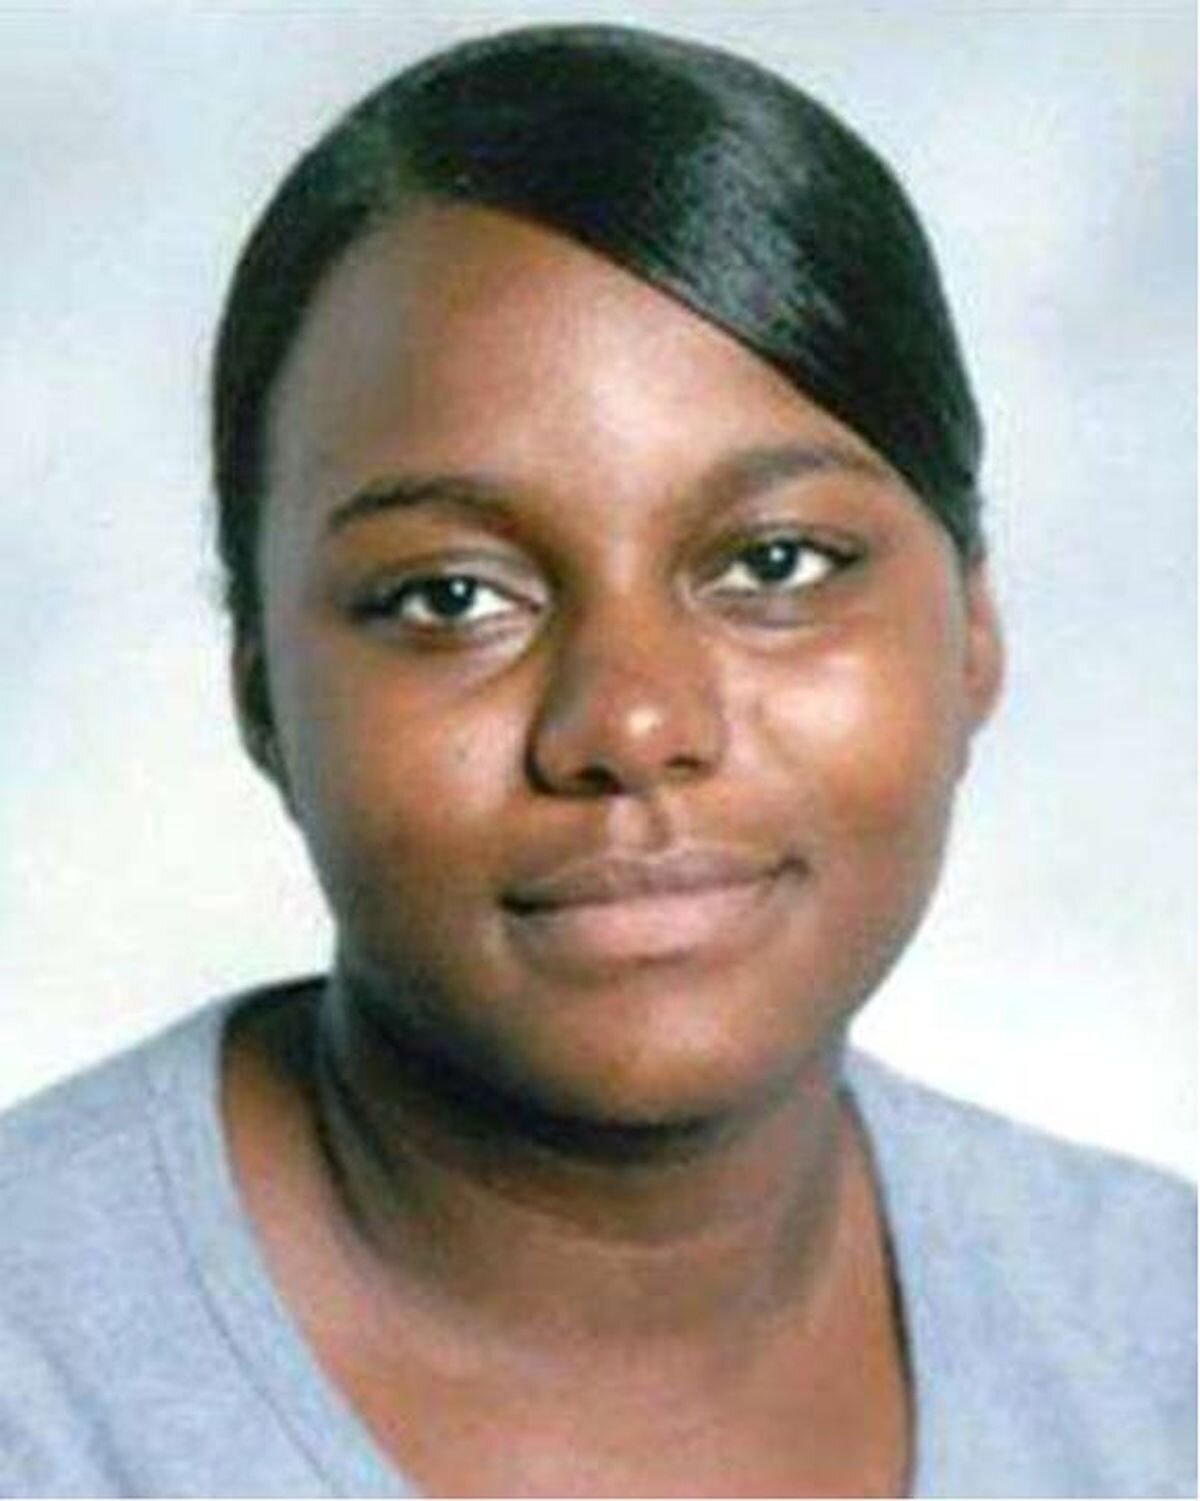 LaQuanta was 19 when she went missing